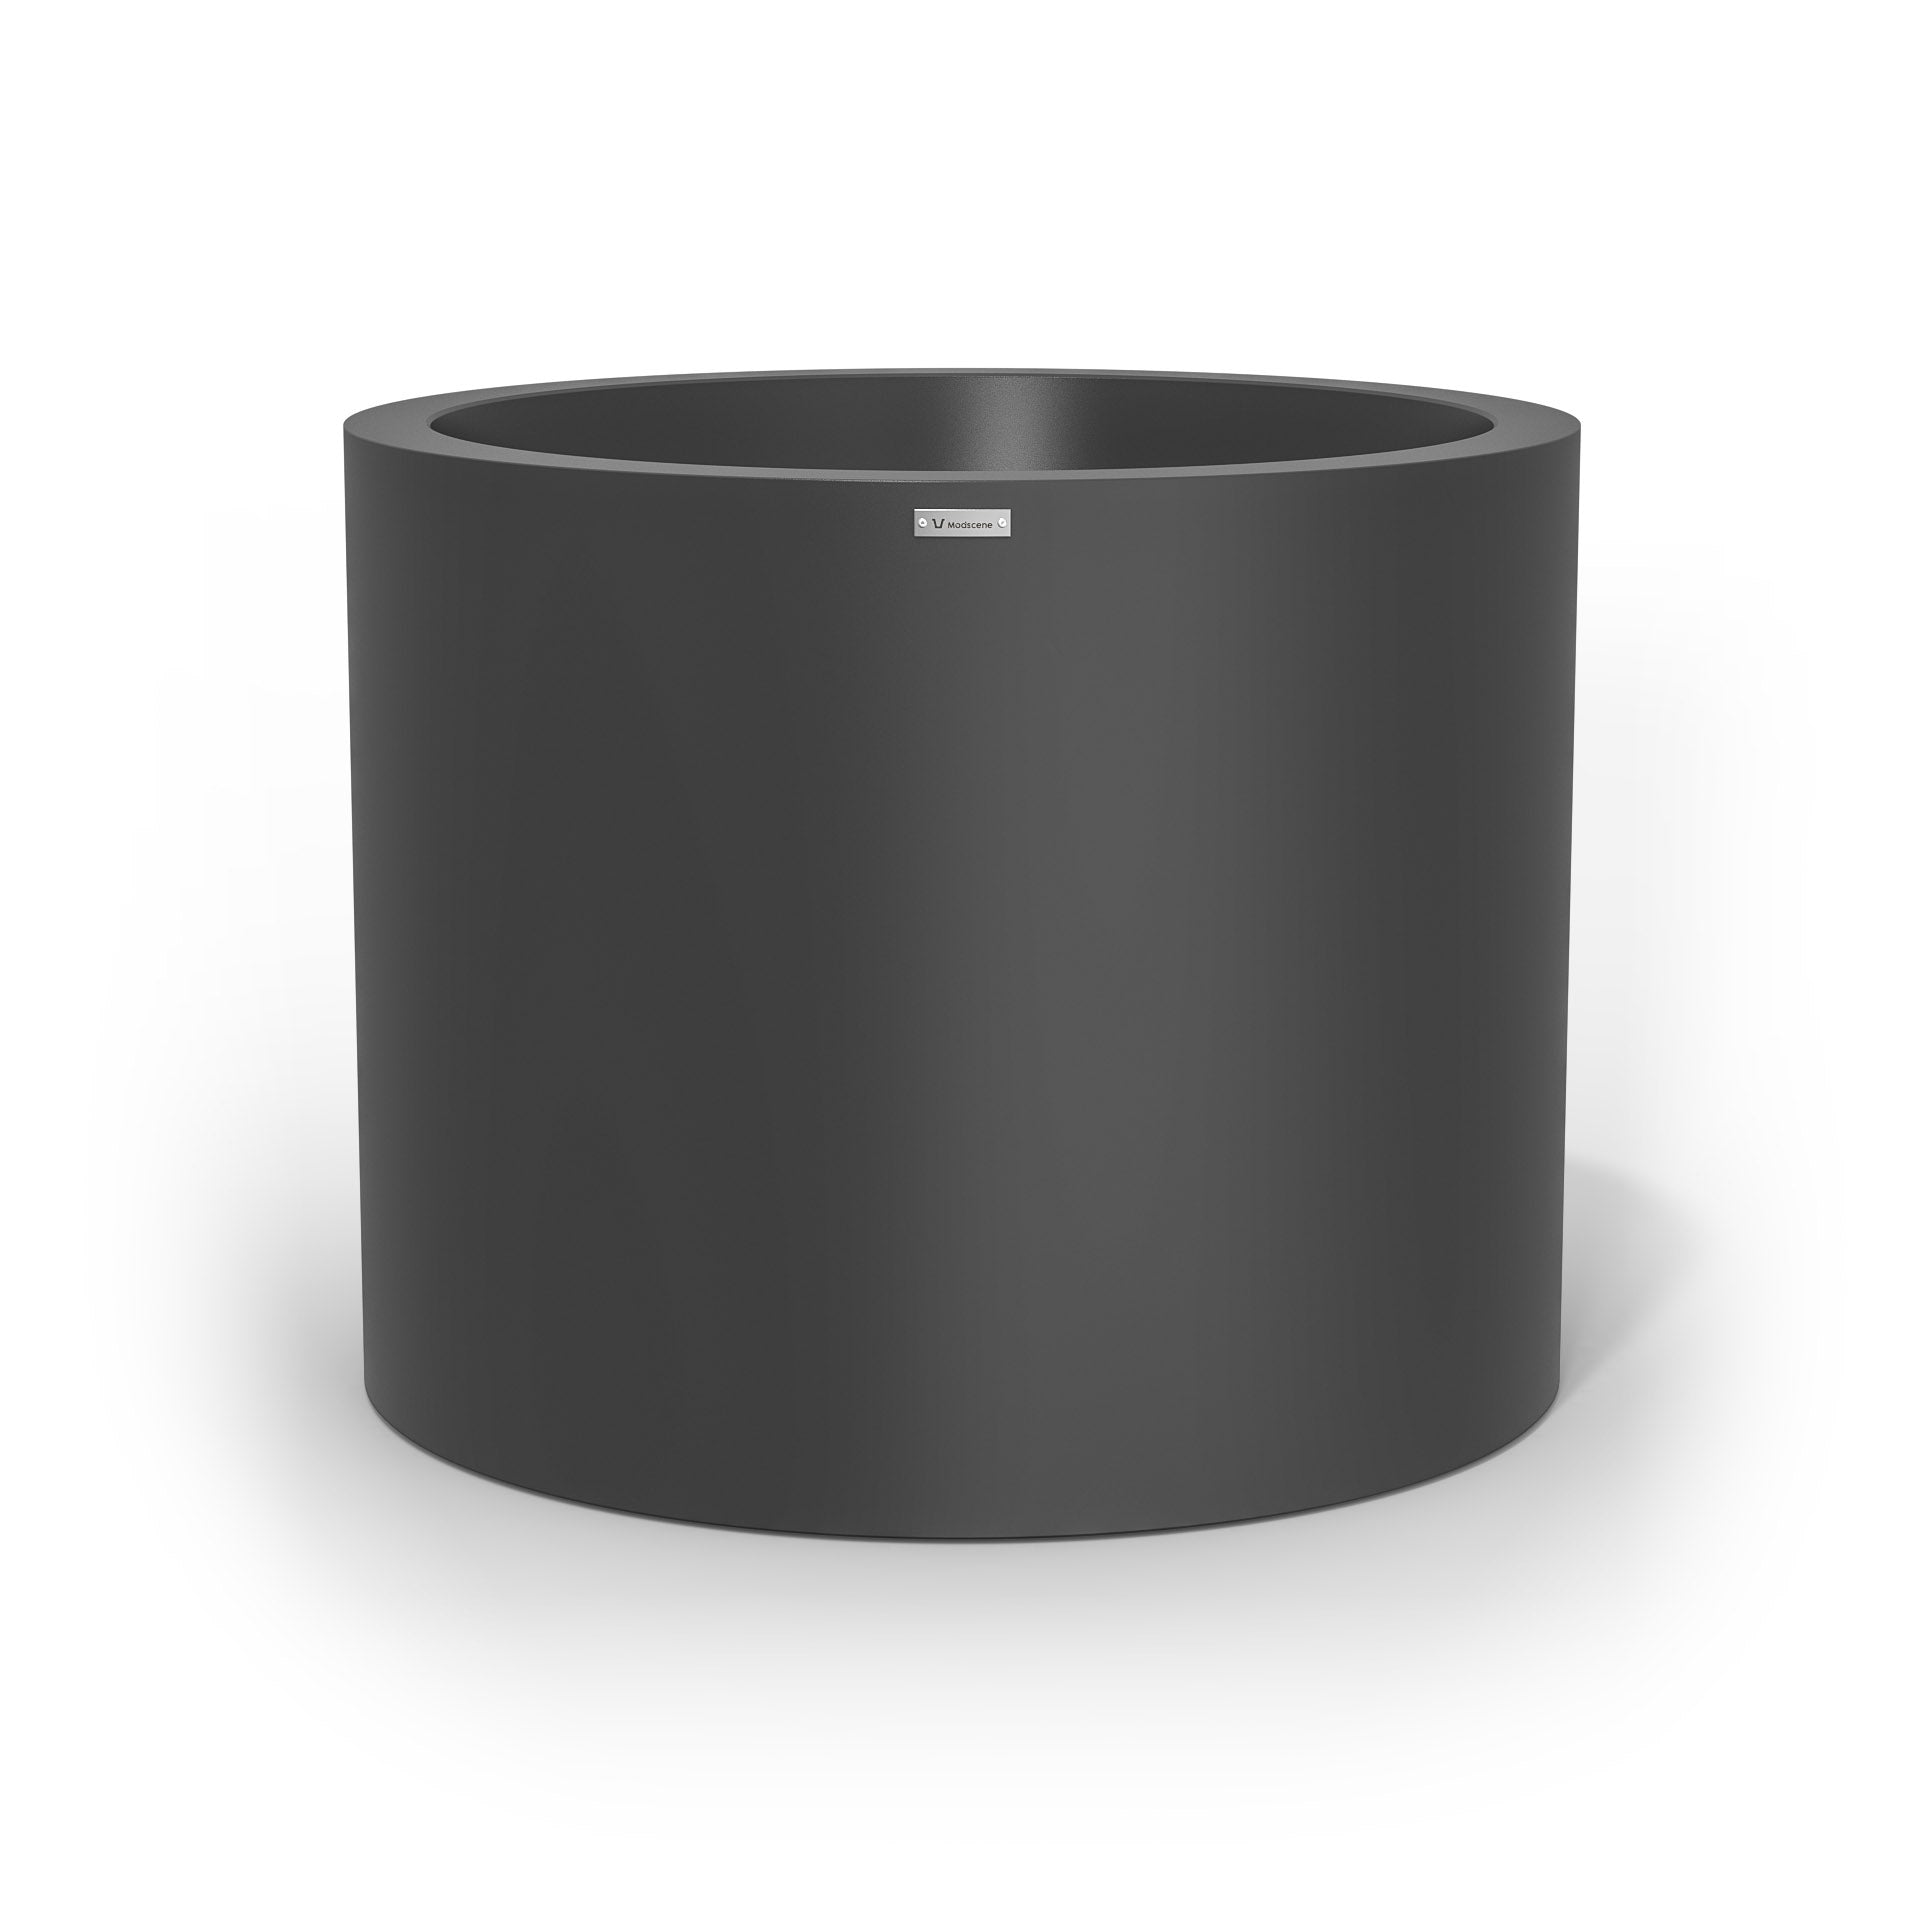 An extra large cylinder pot planter in a dark grey colour. Made by Modscene NZ.